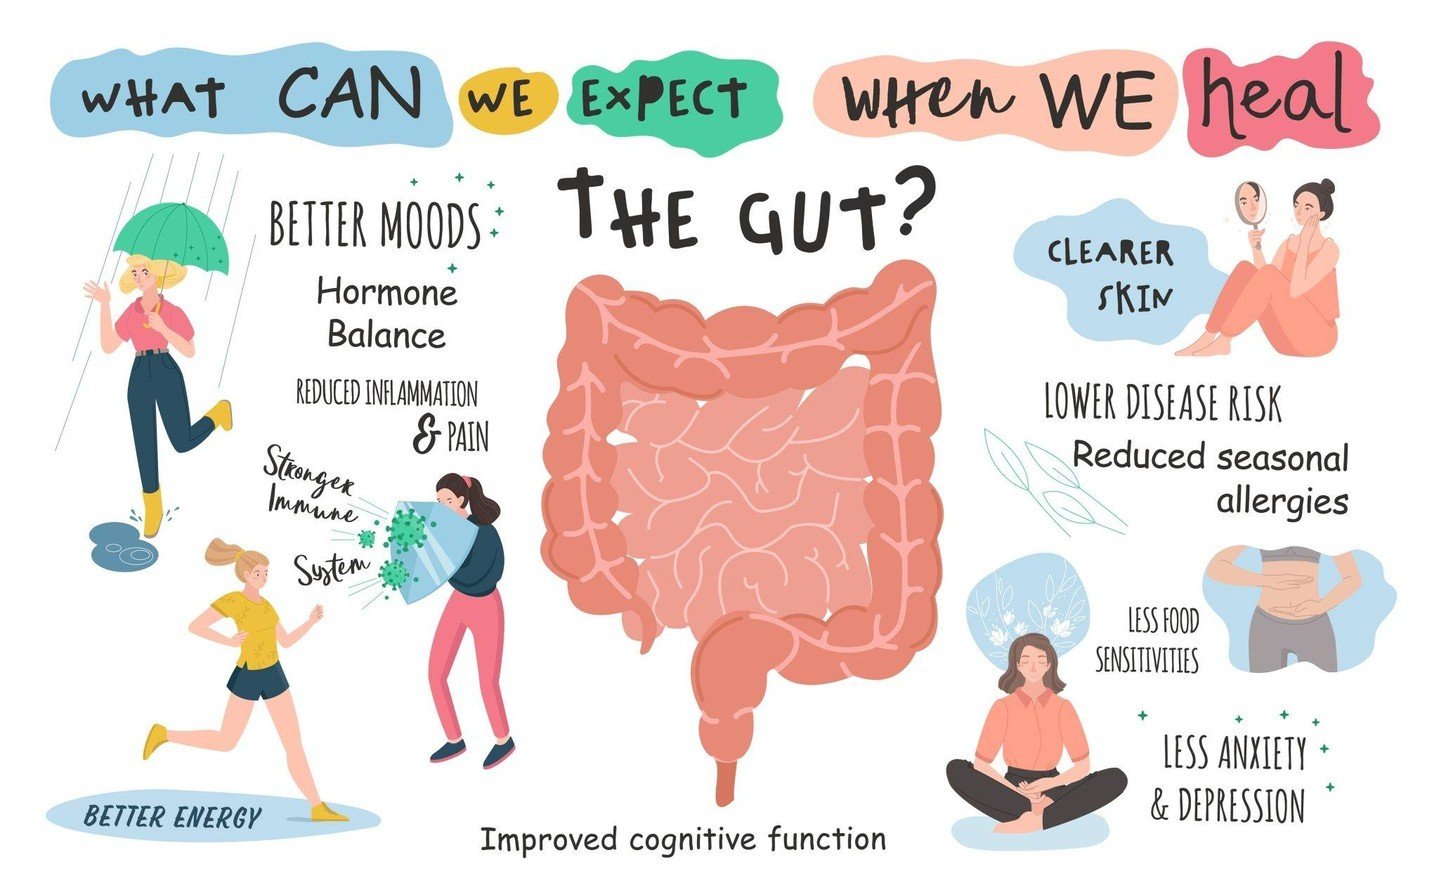 More and more we are hearing about the incredible connection between our gut and brain!

Did you know that the gut and brain are in constant communication through what's known as the gut-brain axis?

Research has shown that the health of our gut can 